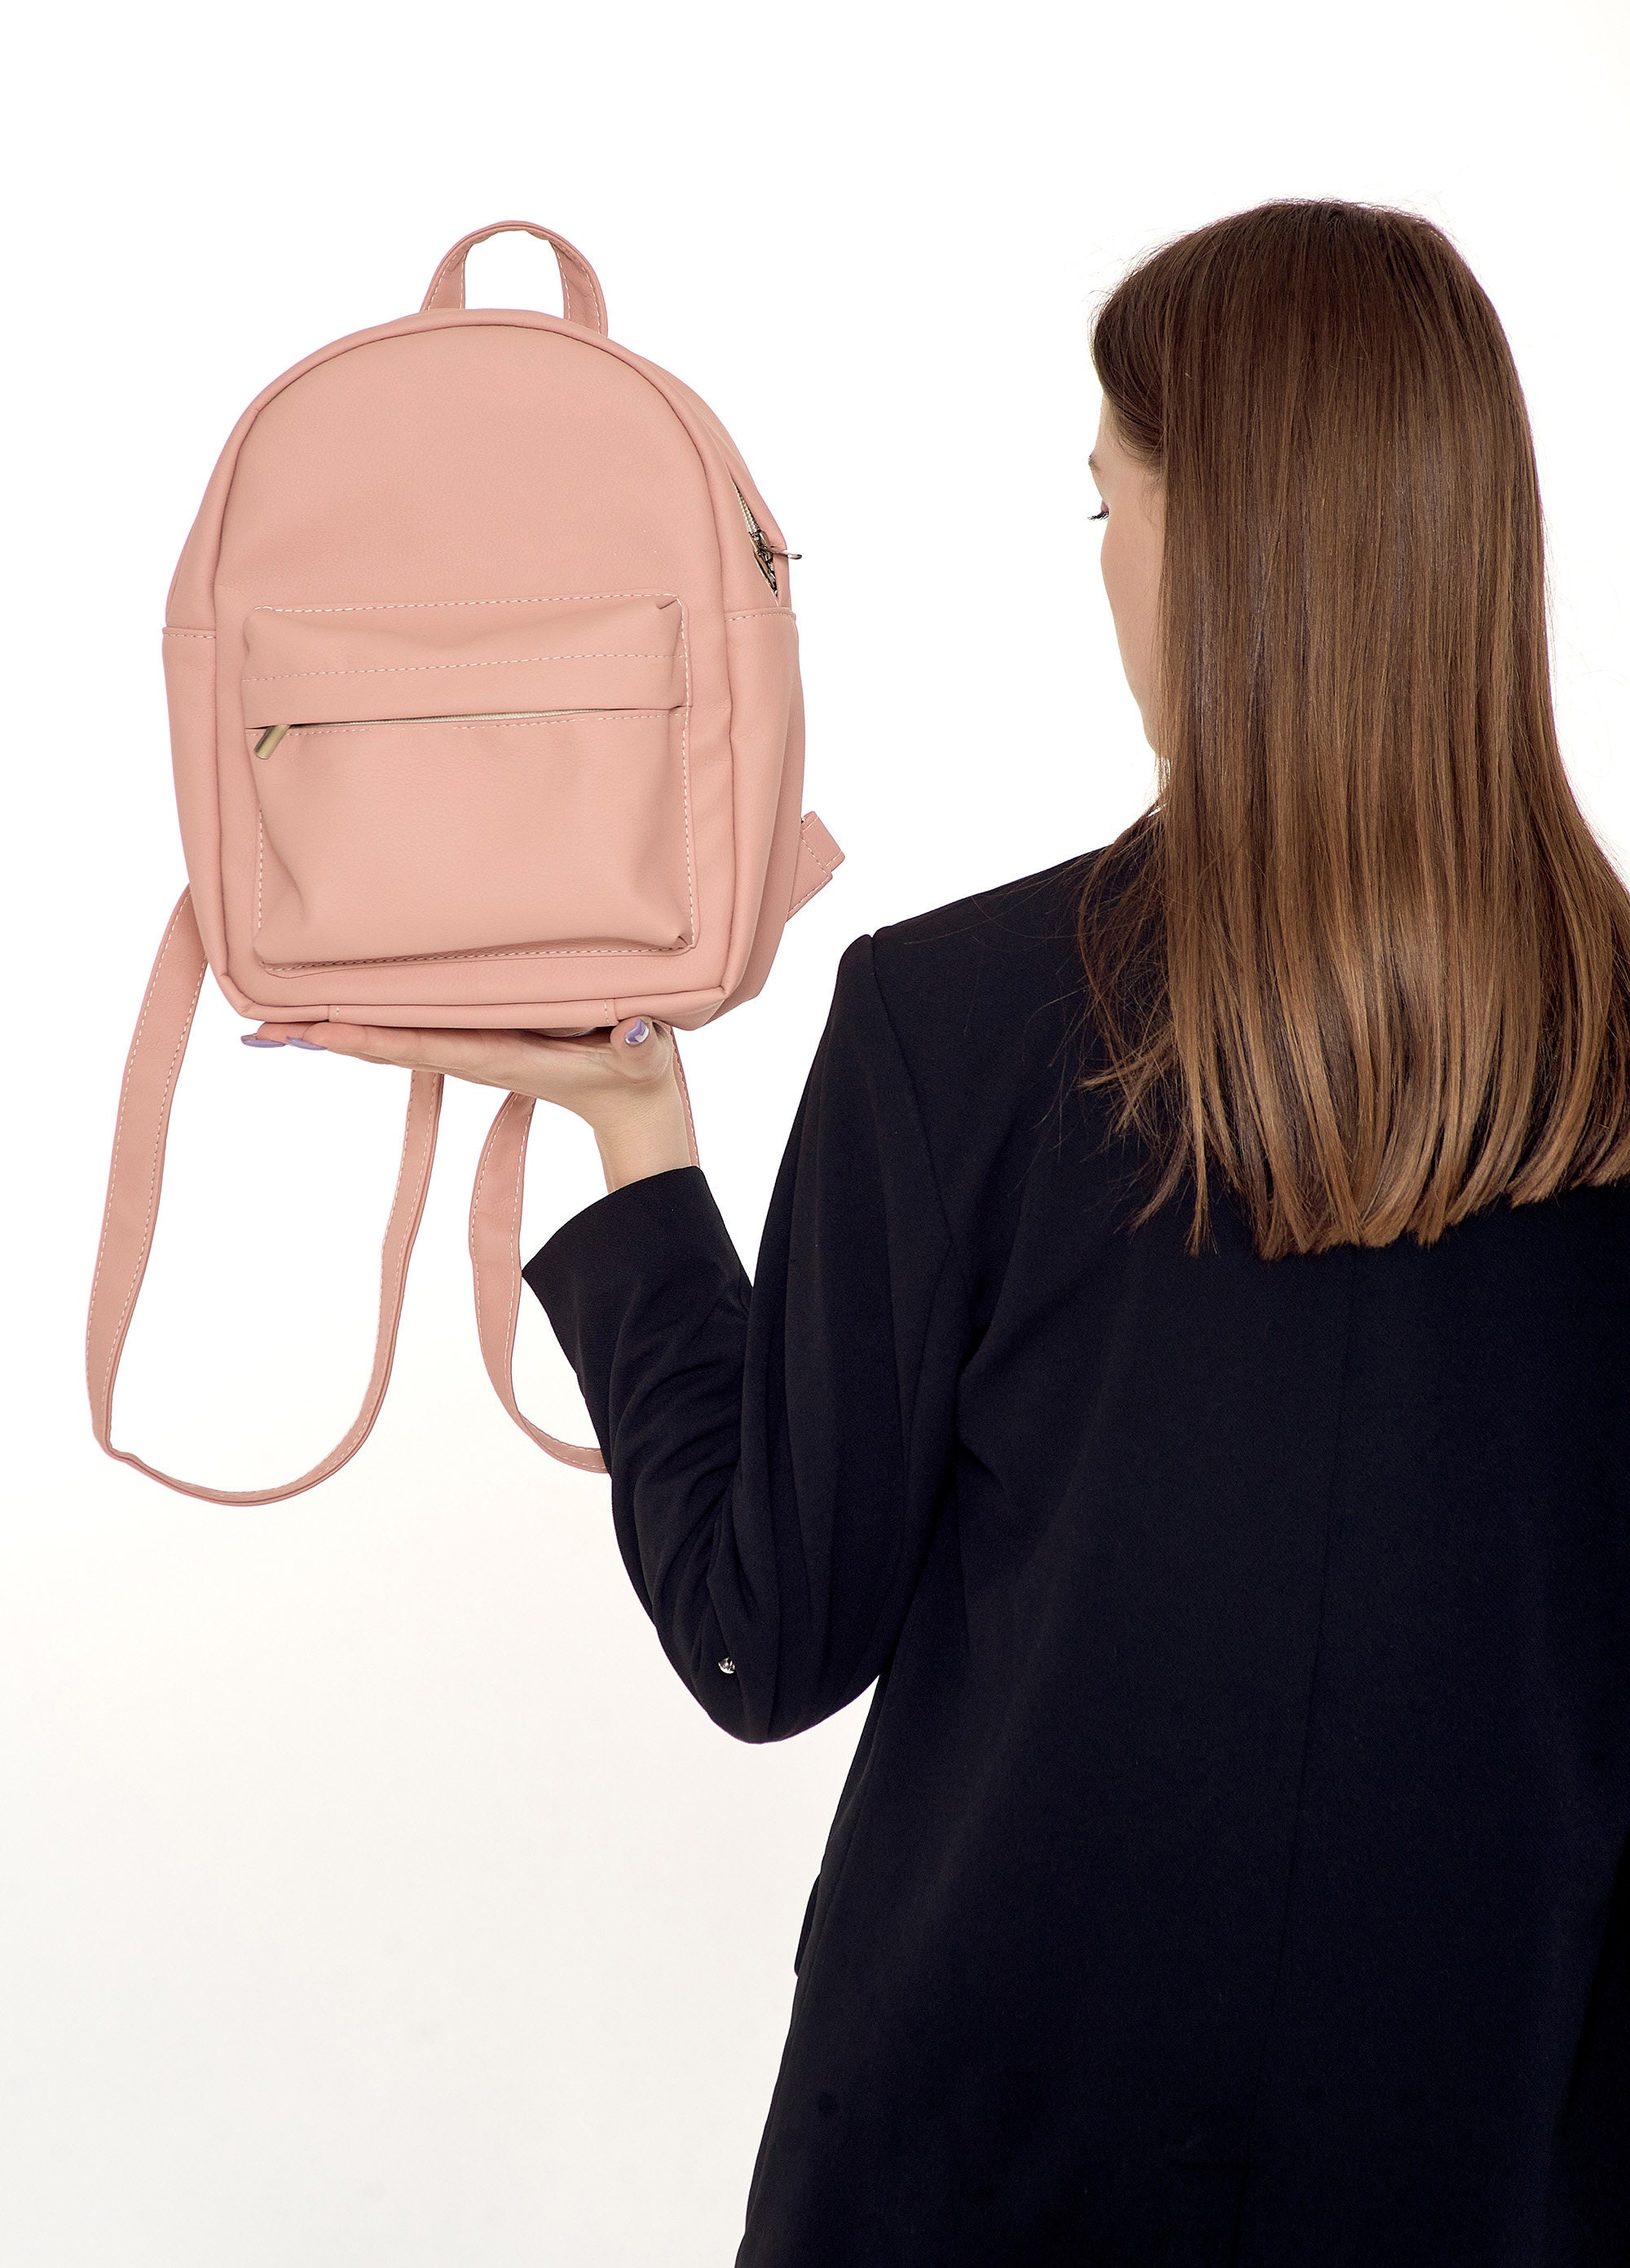 H & M - Small backpack - Pink, Compare